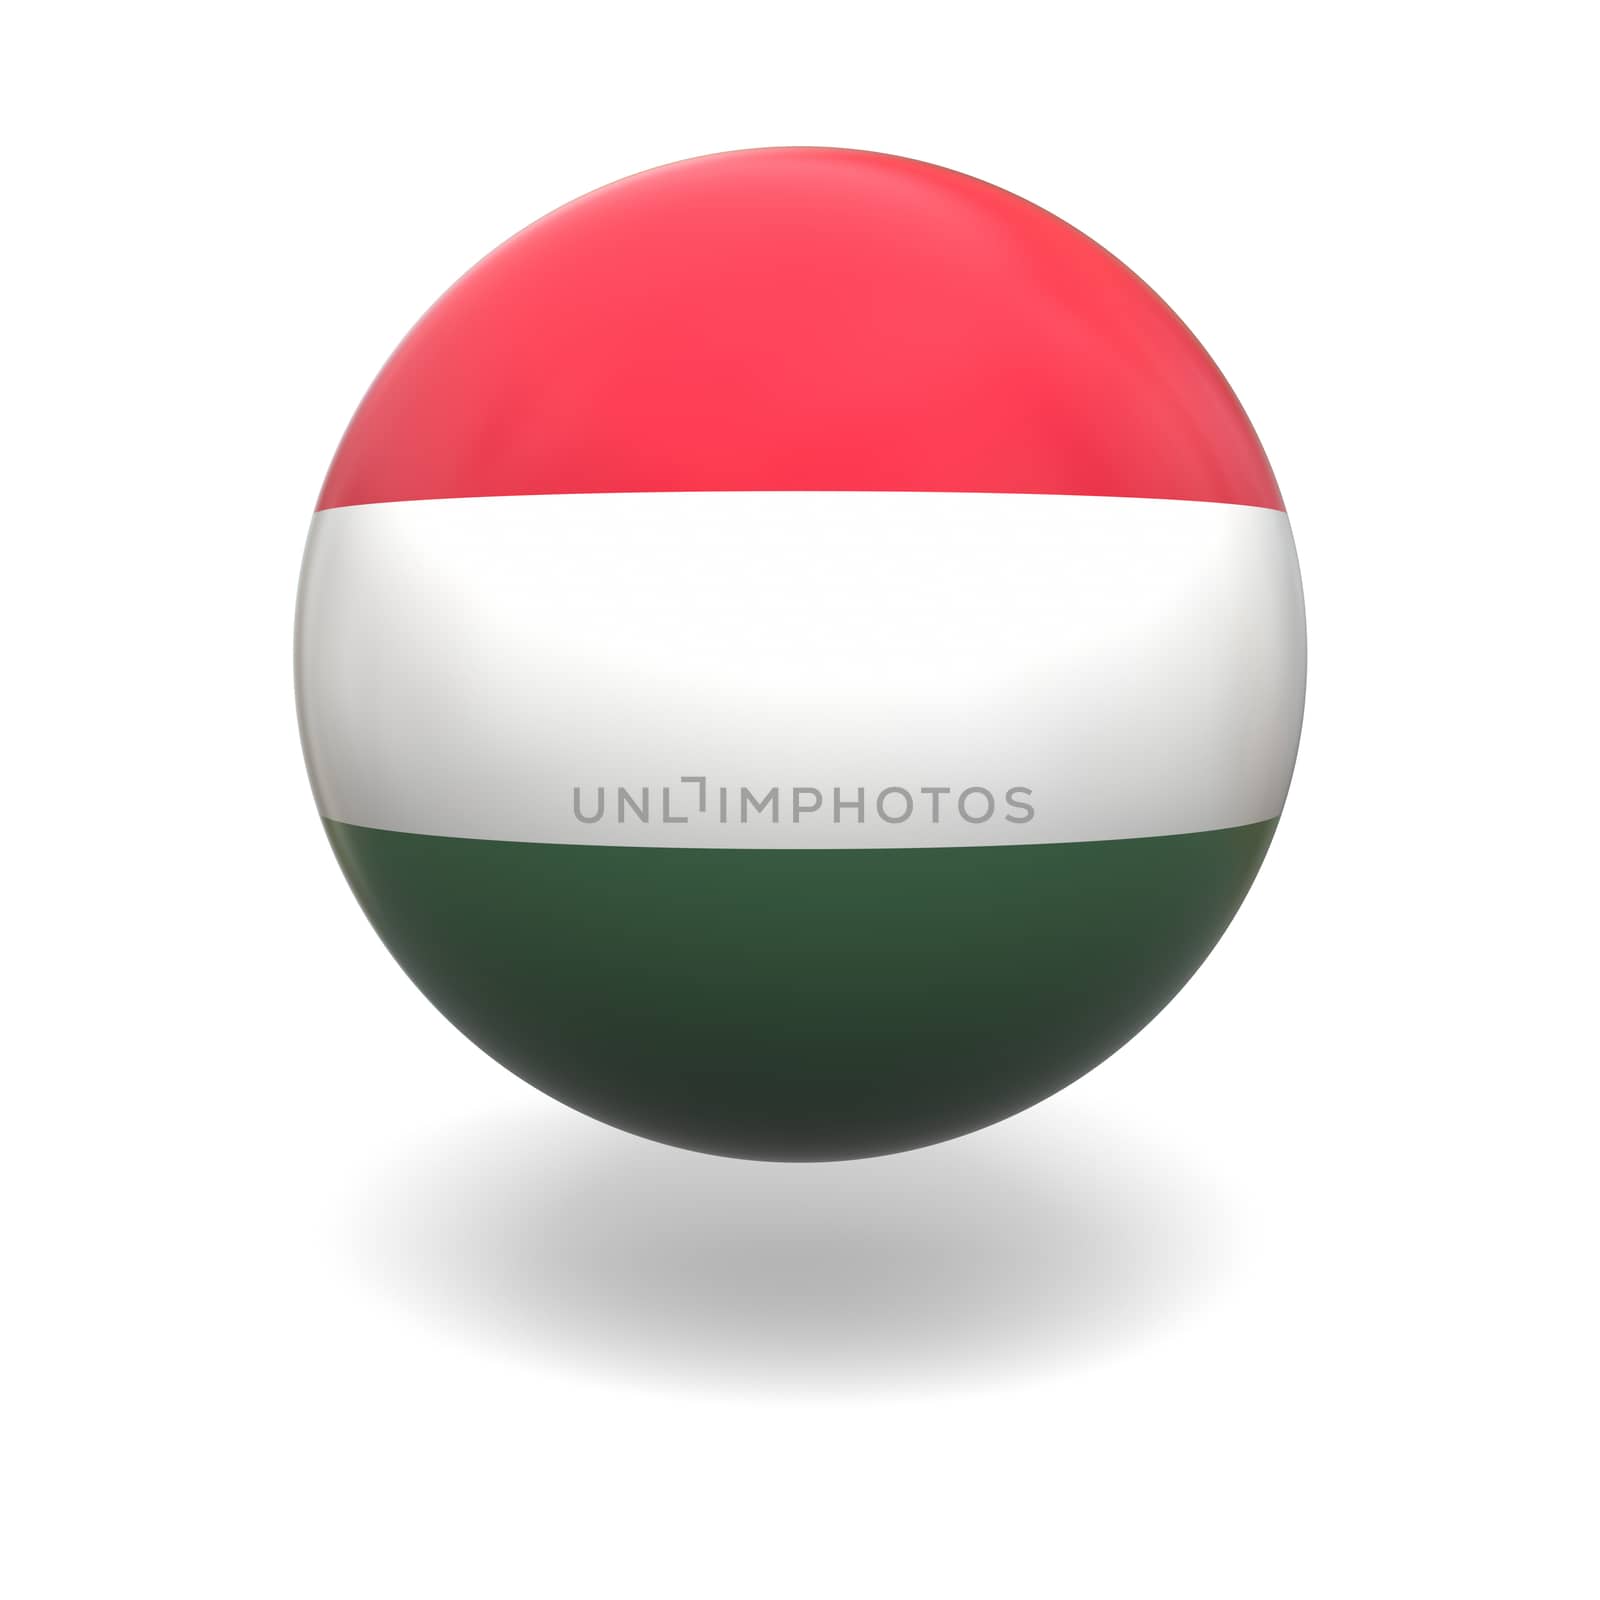 Hungarian flag by Harvepino